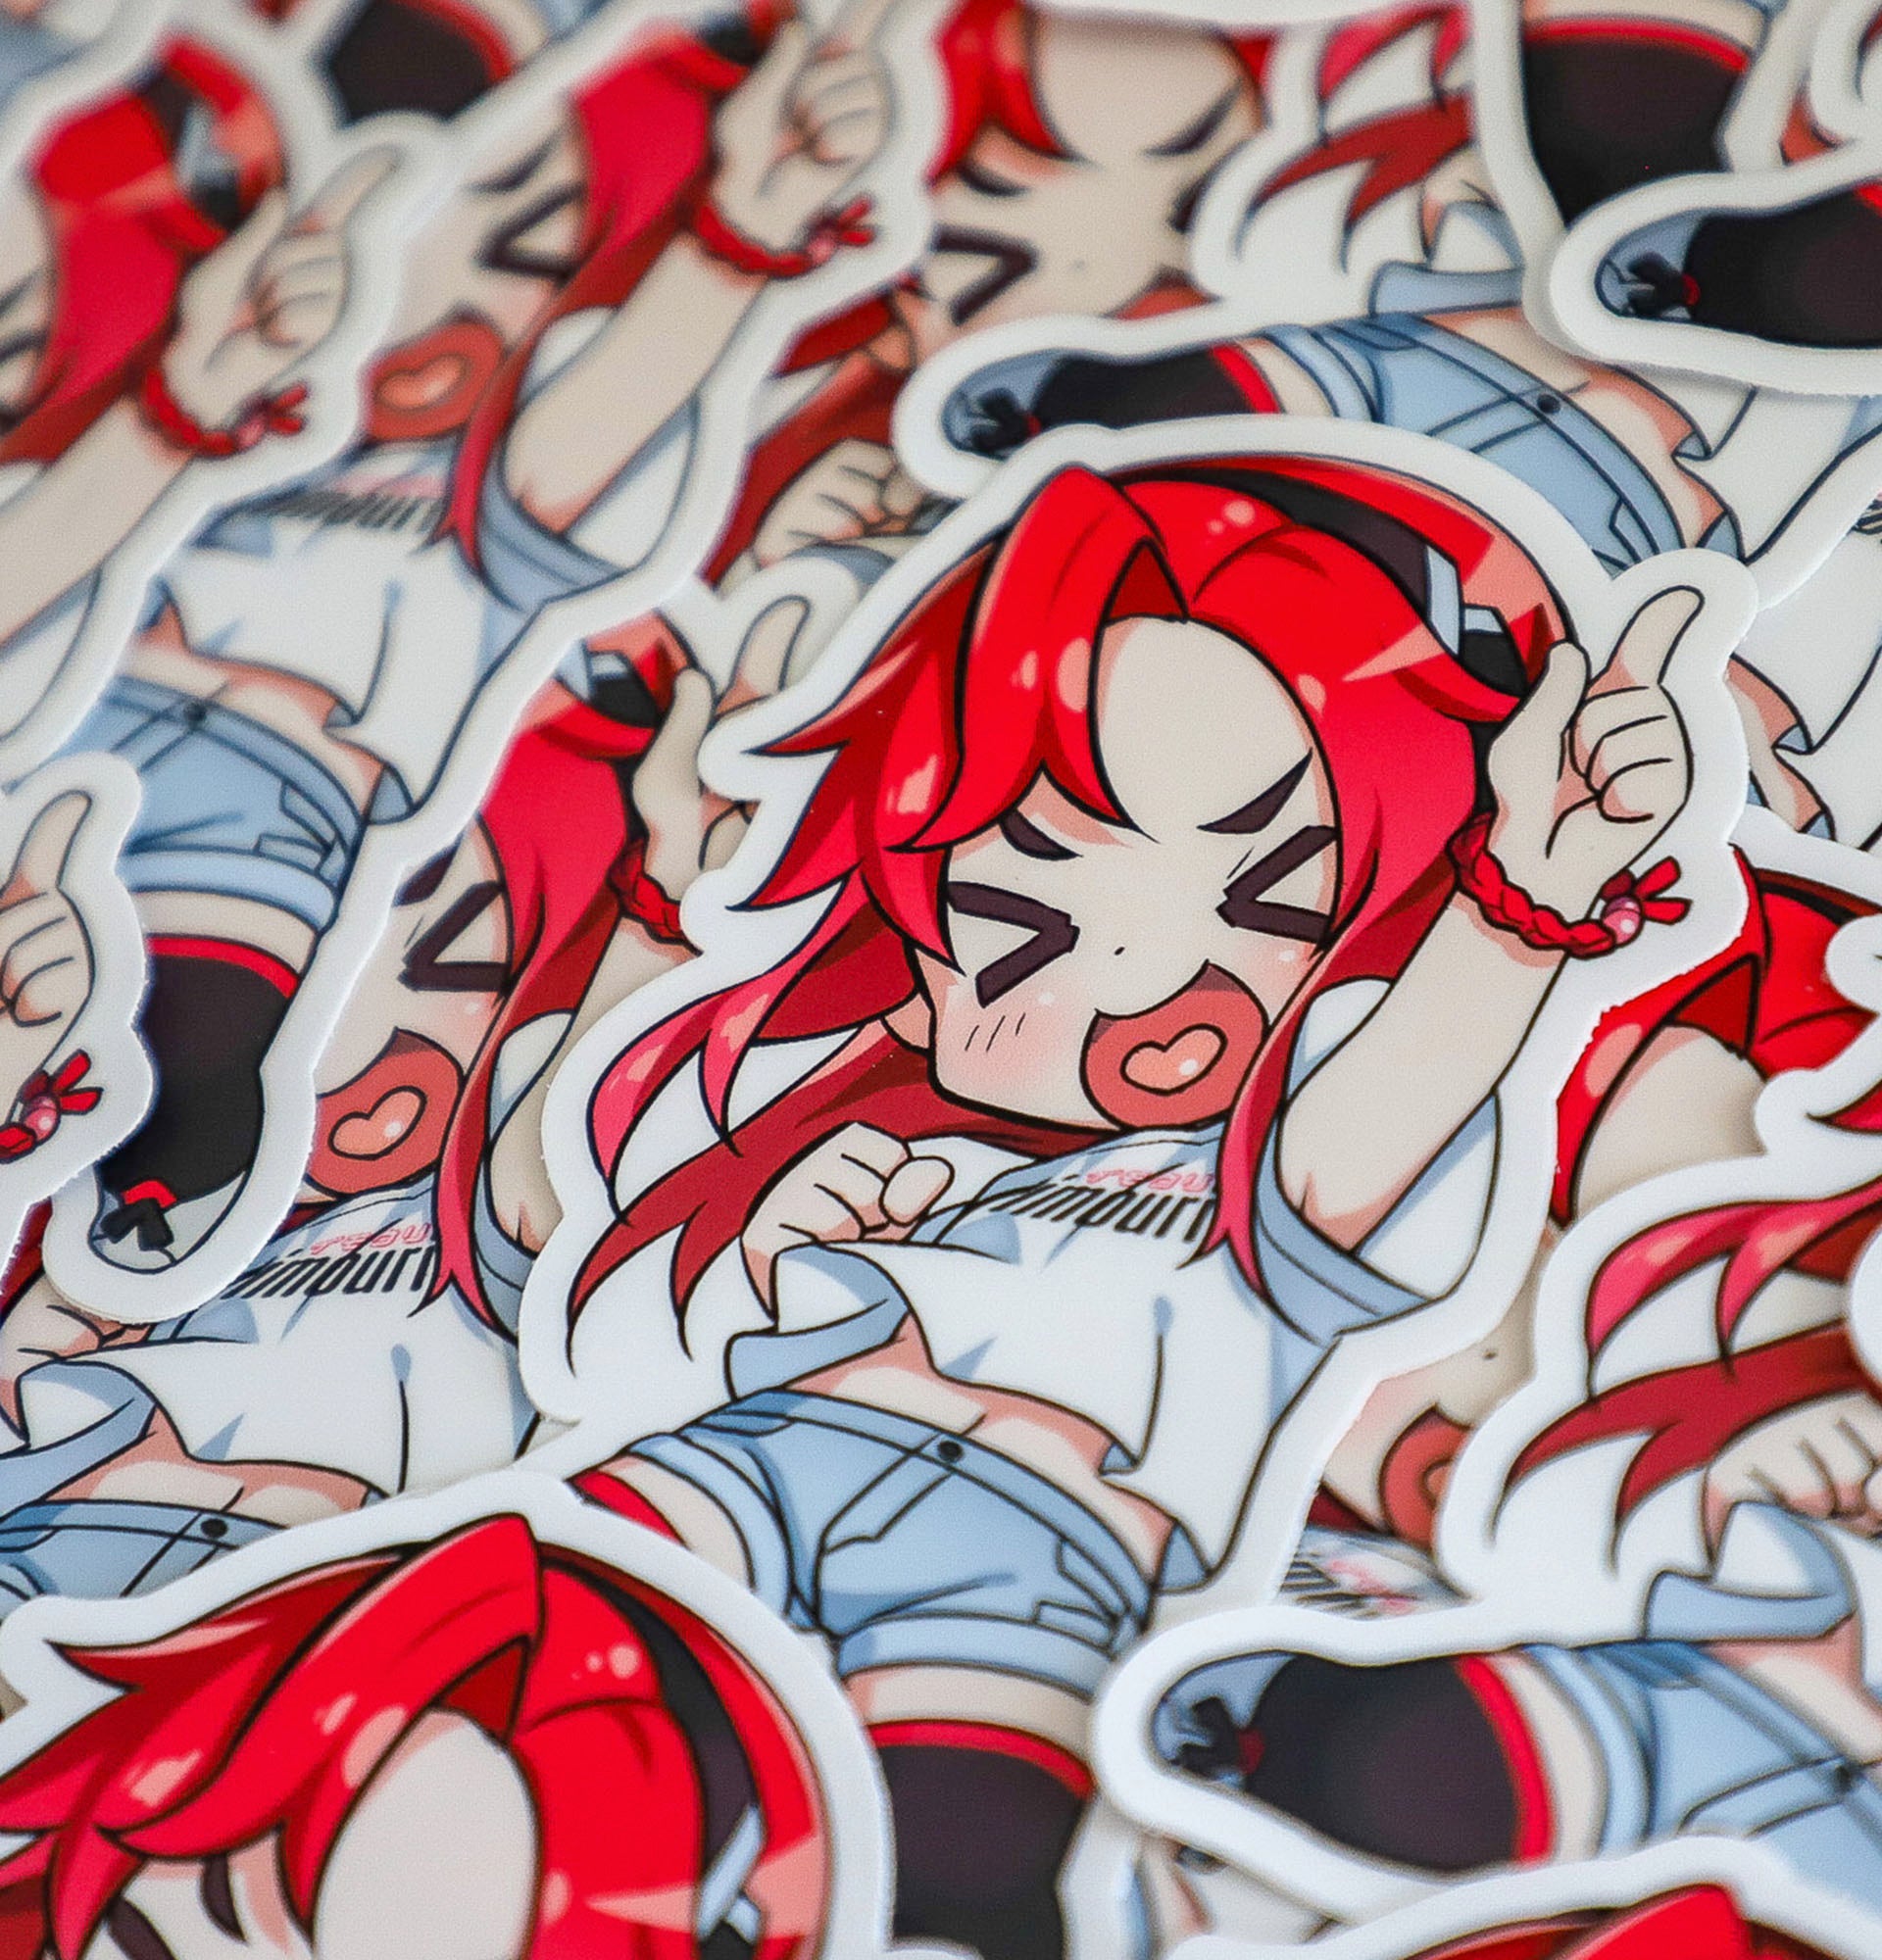 Imouri Anime Stickers & Decals